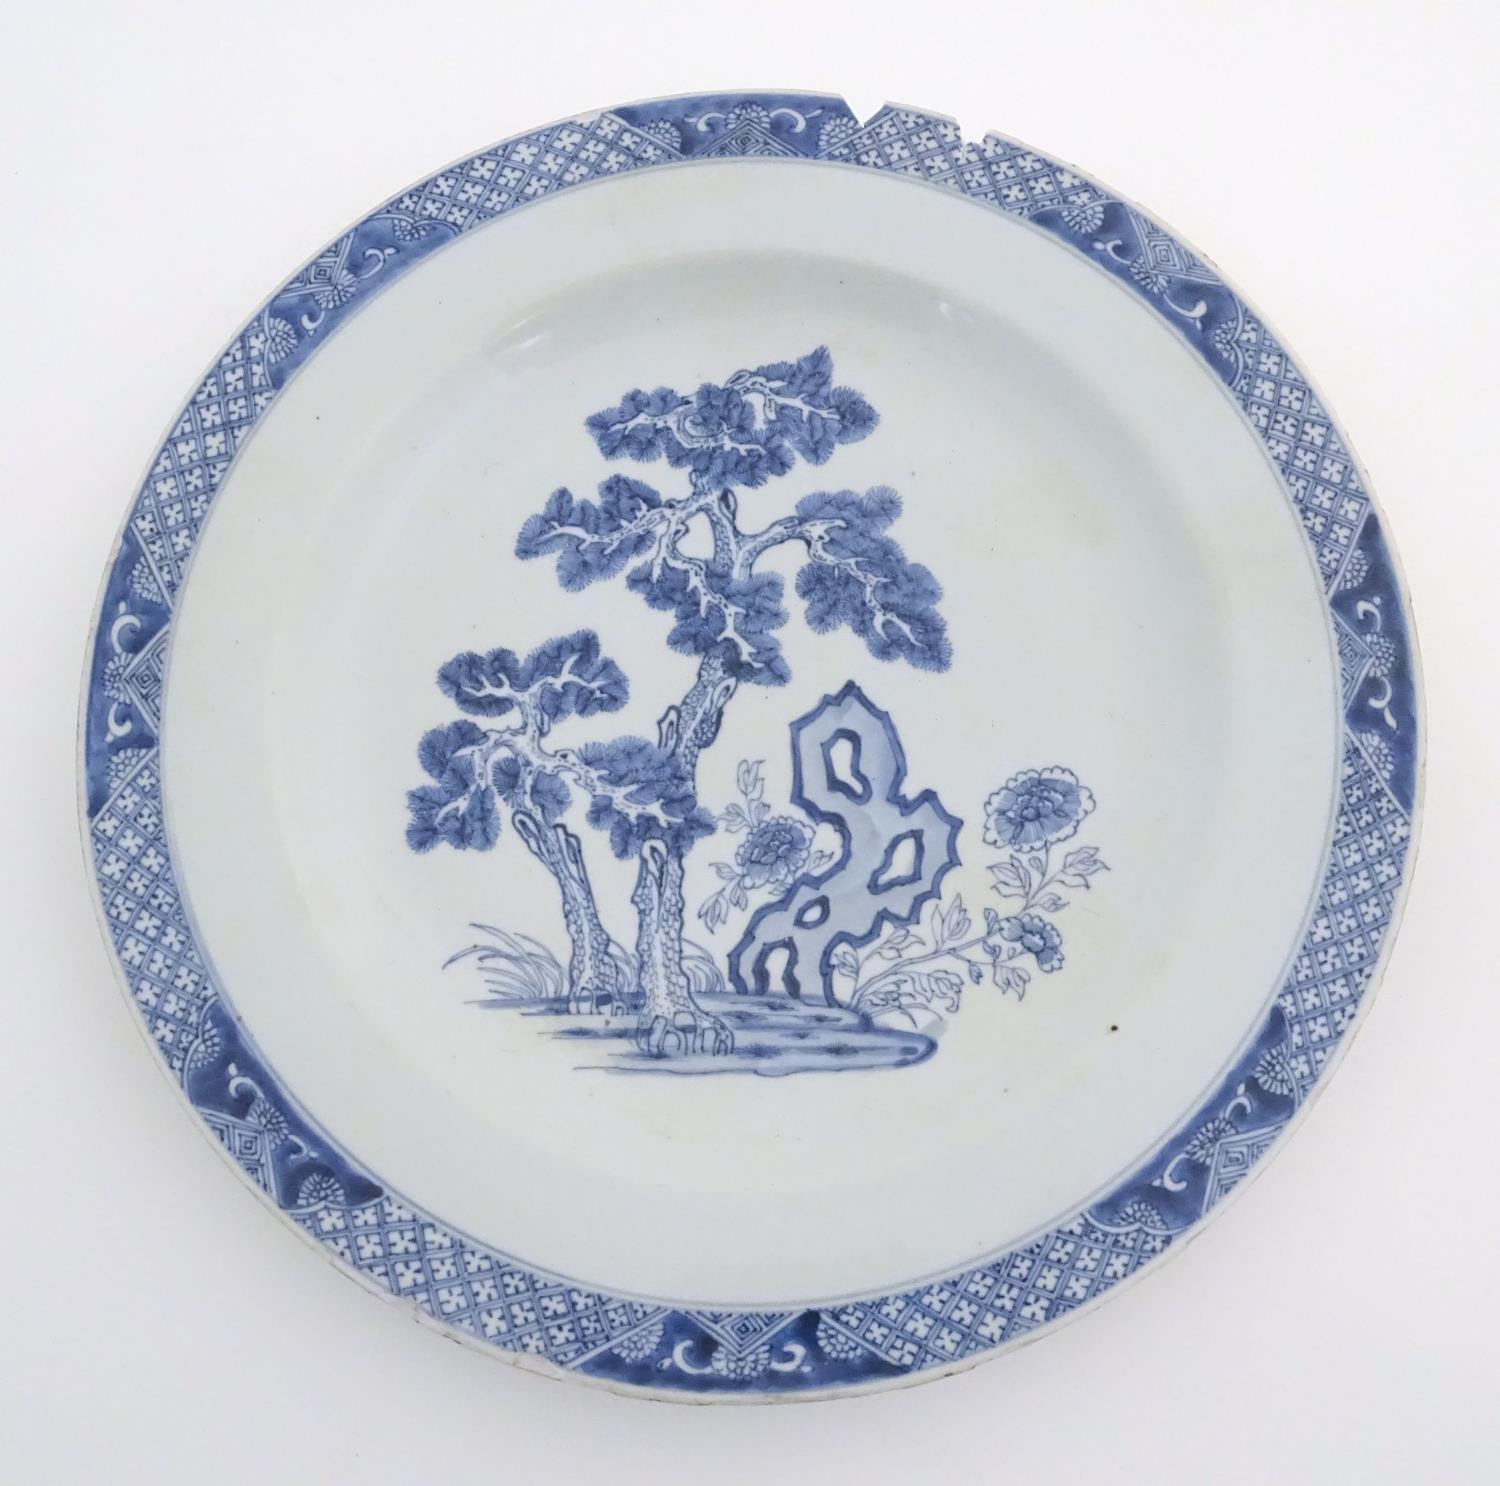 A Chinese blue and white charger decorated with a stylised landscape with trees and flowers, and a